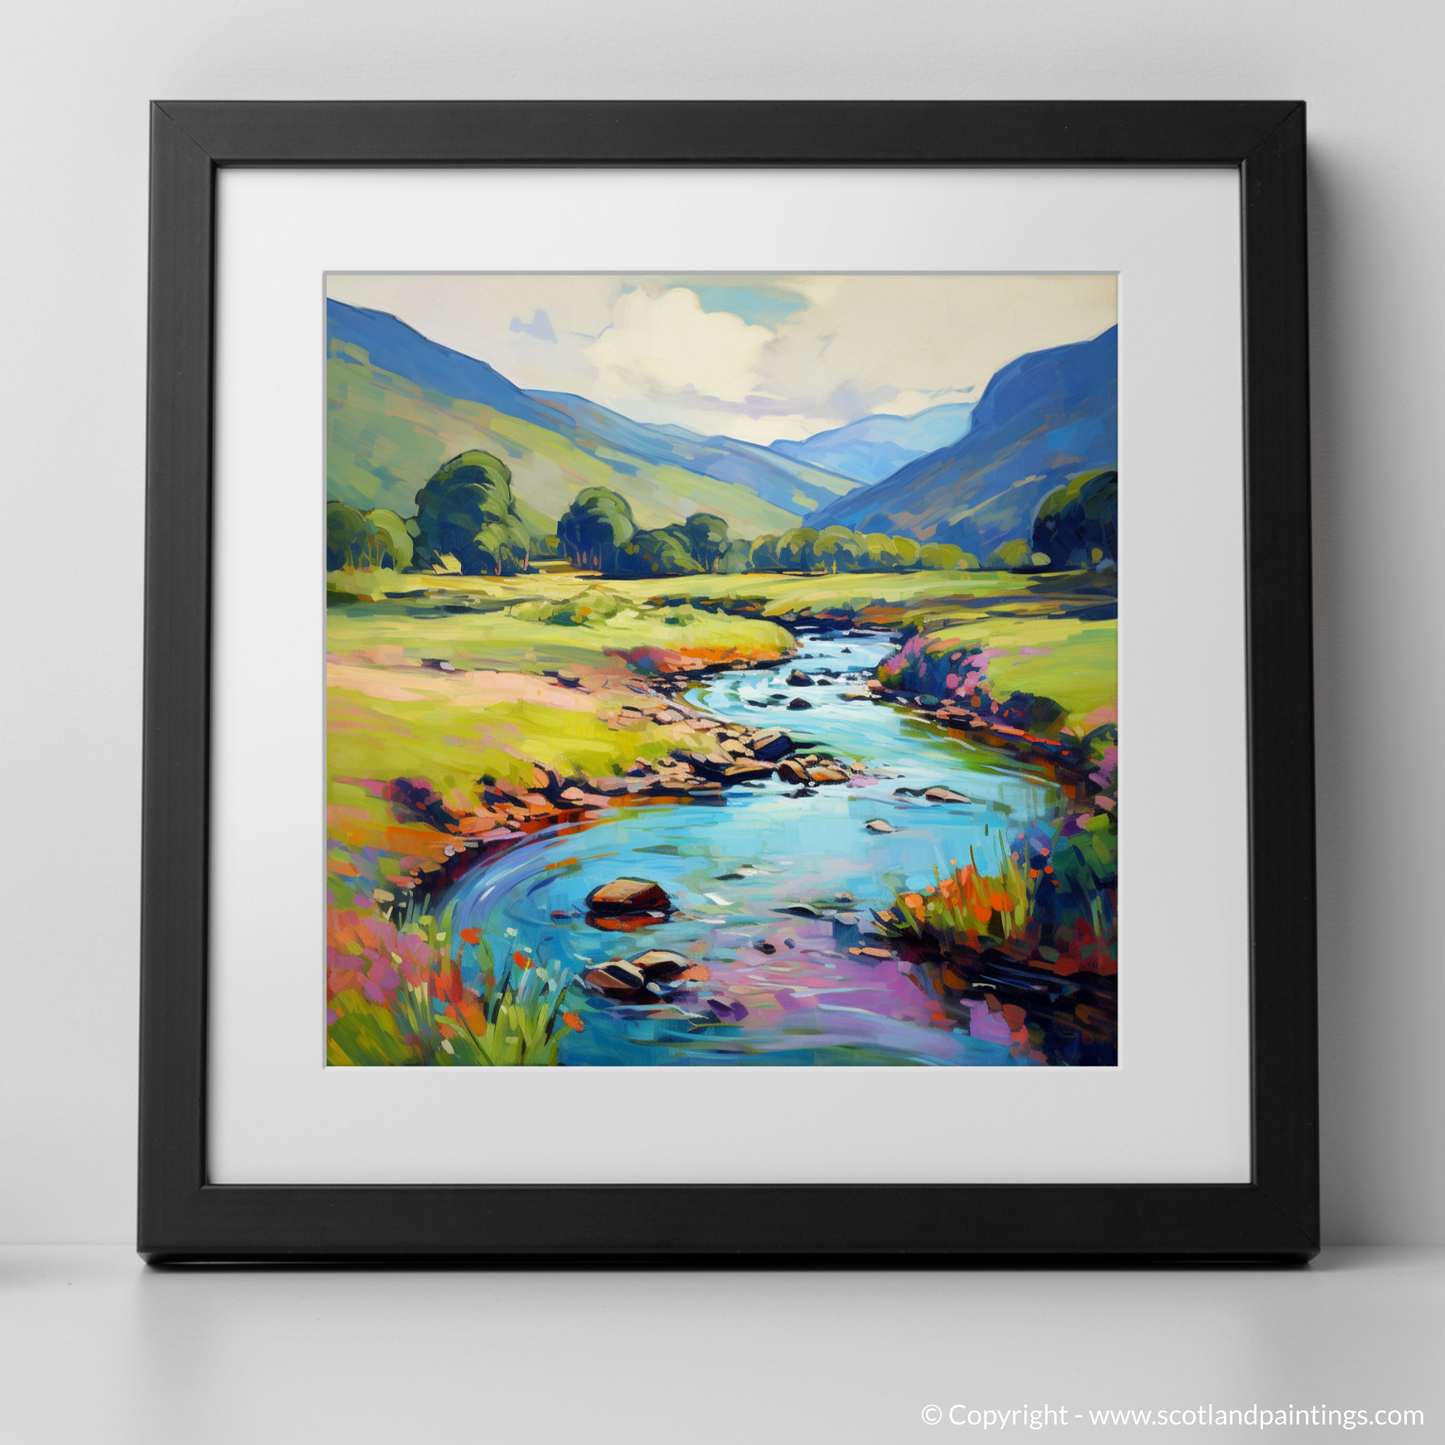 Art Print of Glen Lyon, Perthshire in summer with a black frame